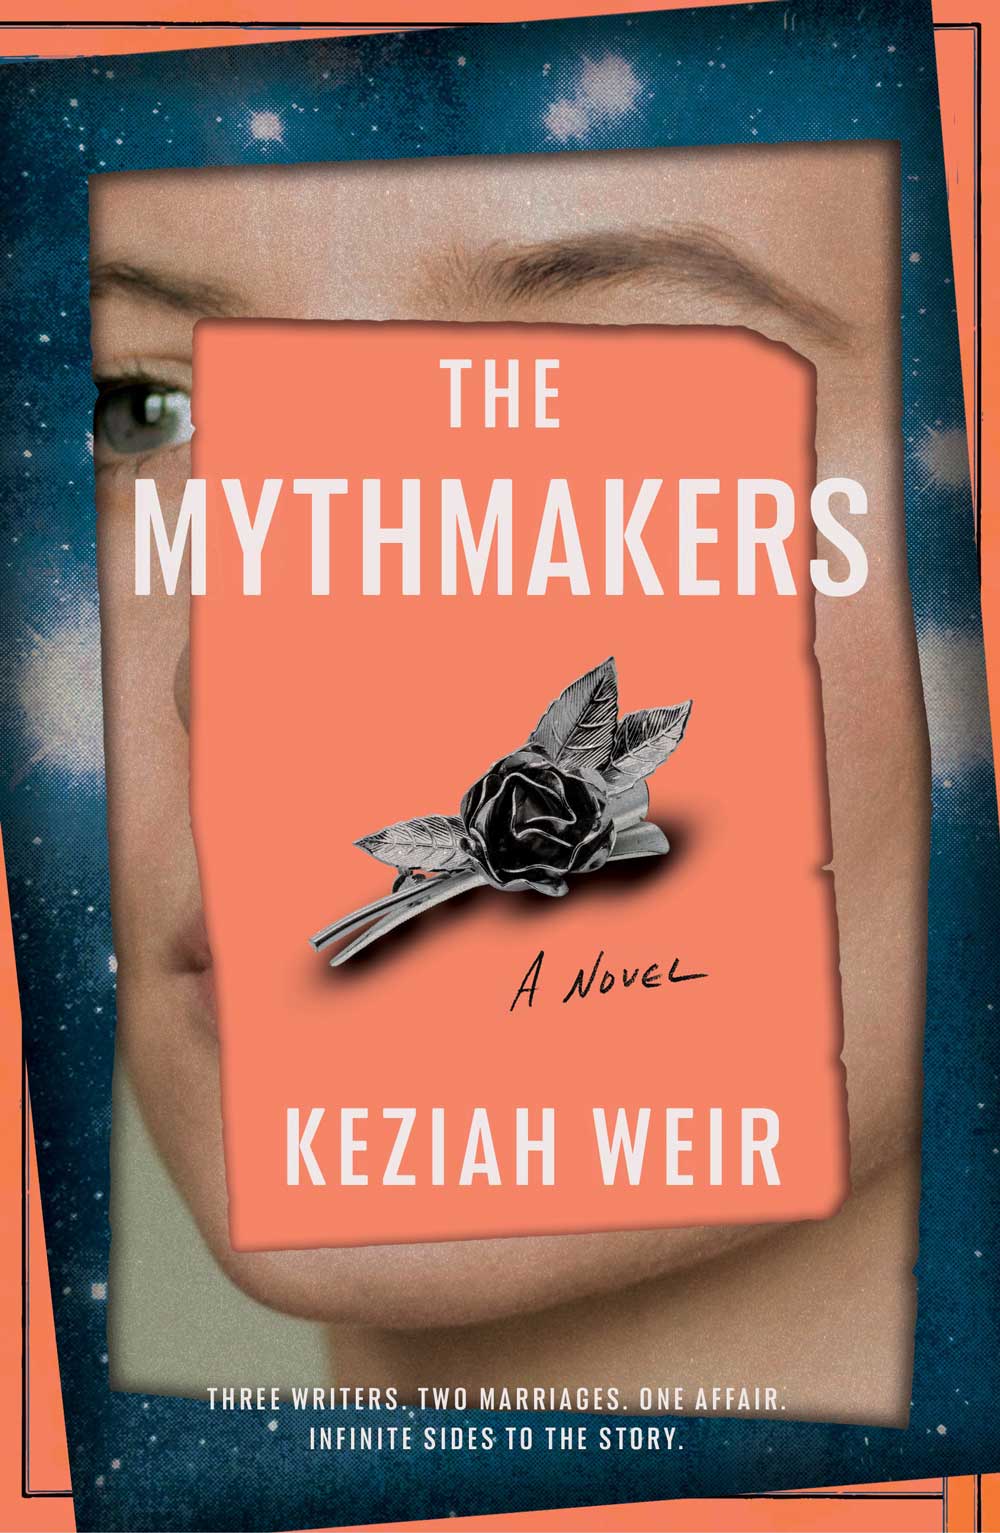 Book cover of The Mythmakers. A photo of a metal rose accessory on a peach-coloured background, layered on top of a photo of a woman's face.